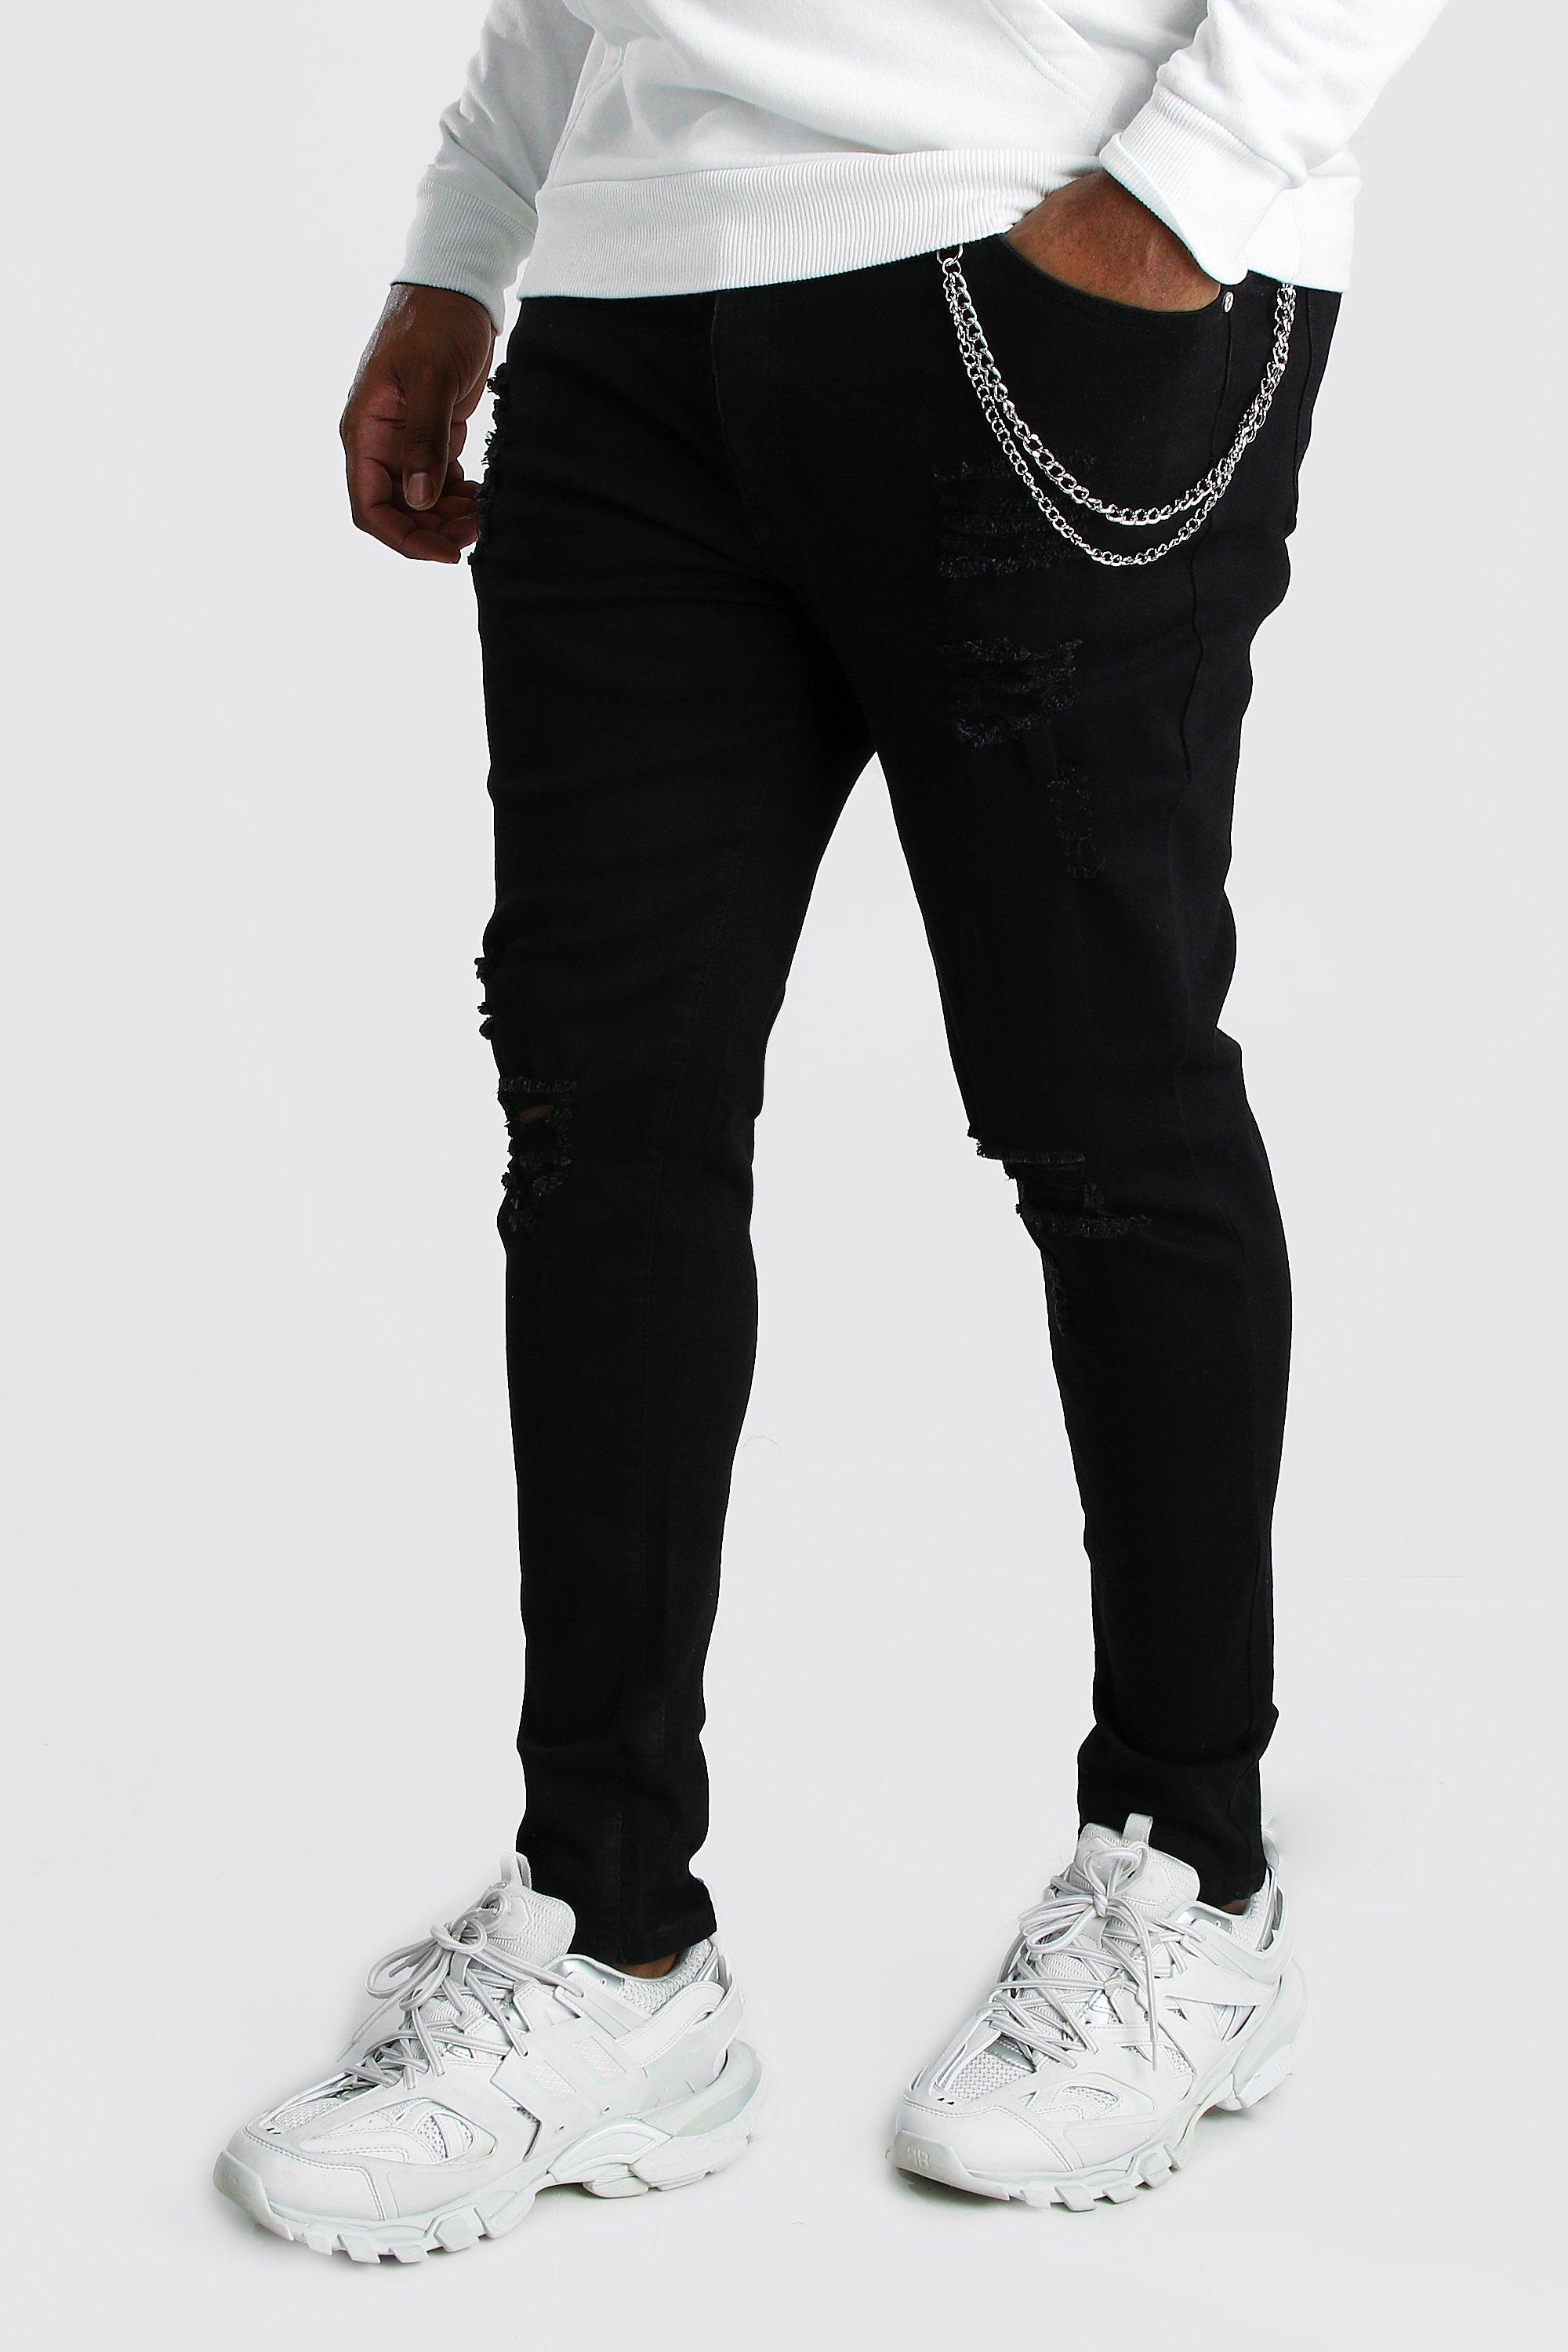 black skinny jeans with chains